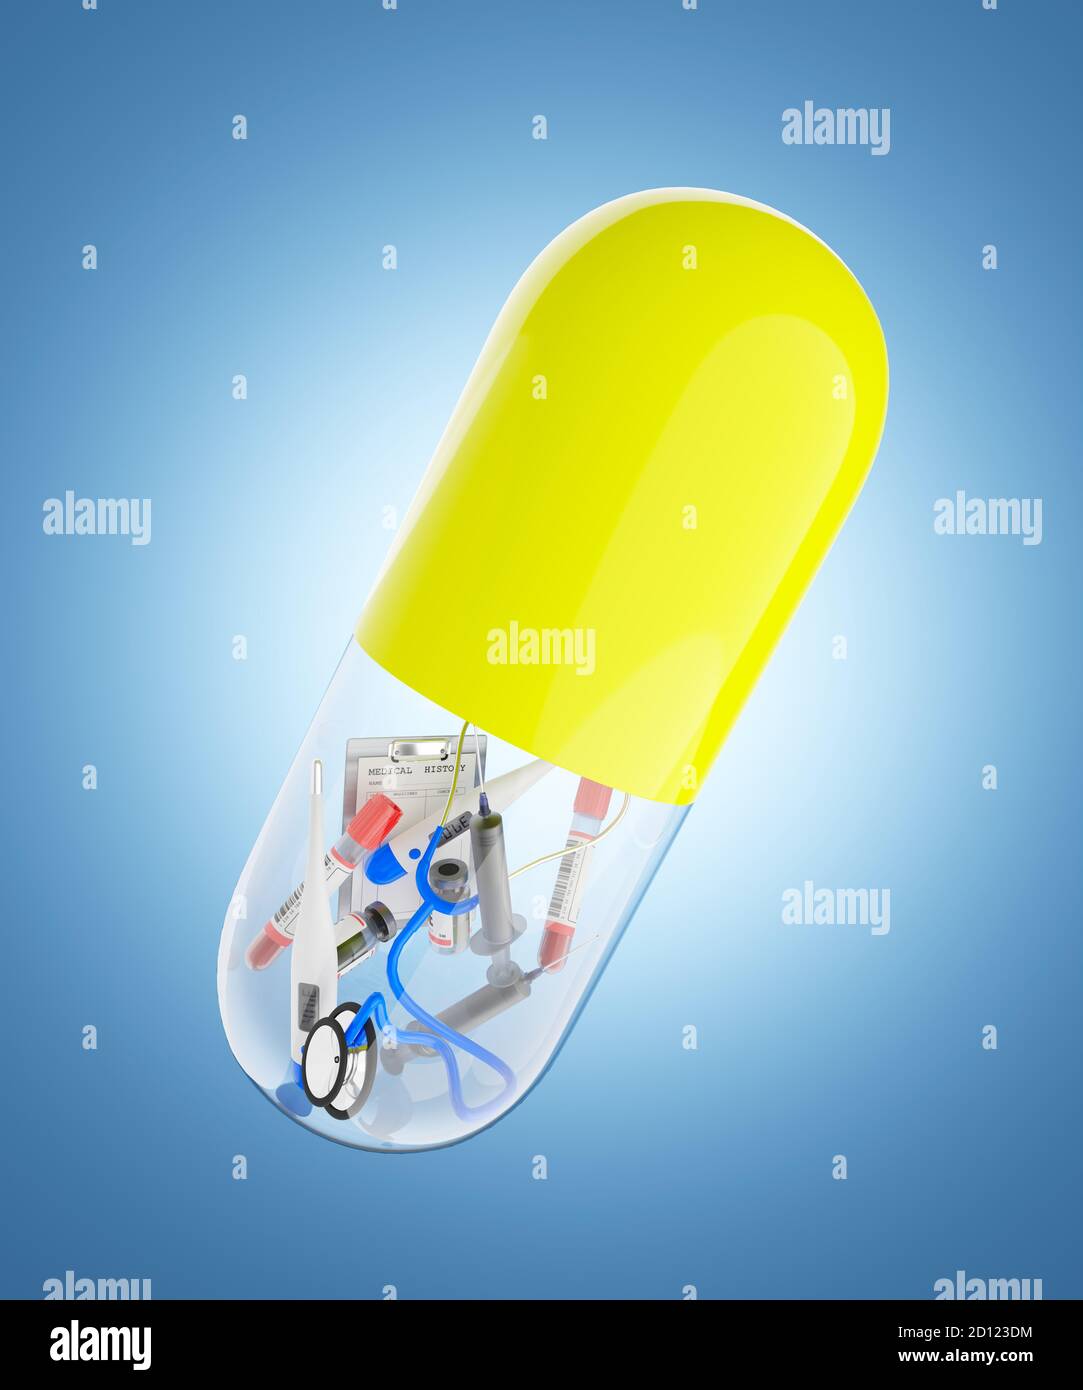 The medical device is packaged in a yellow and clear antibiotic capsule. The concept of maintaining good health by taking prescription drugs. 3D rende Stock Photo